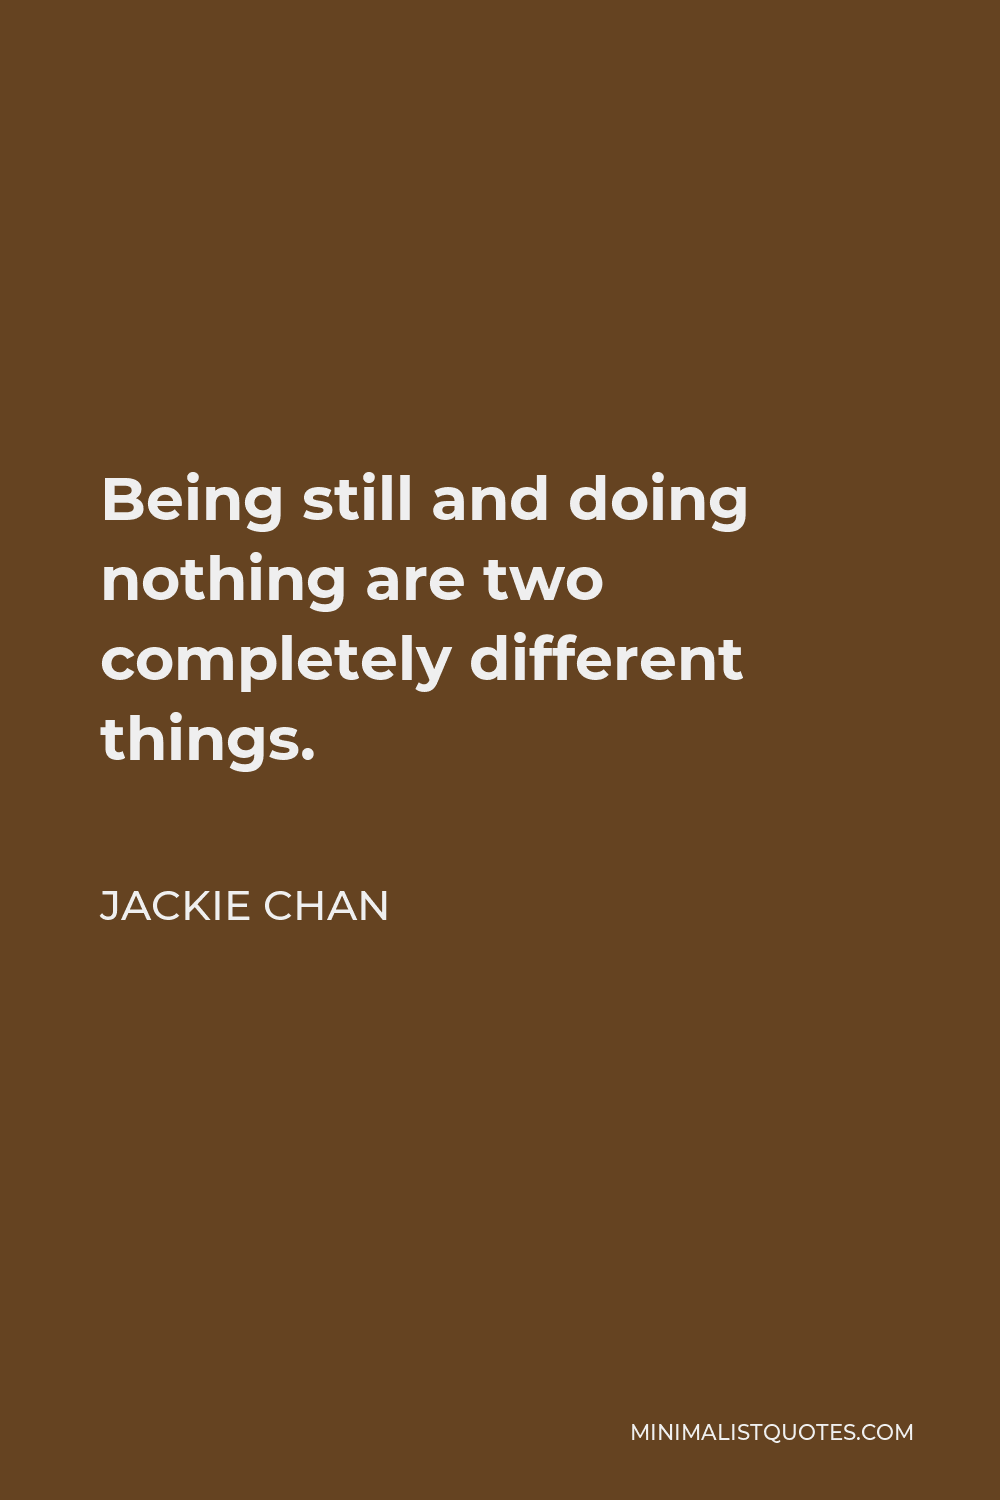 Jackie Chan Quote - Being still and doing nothing are two completely different things.